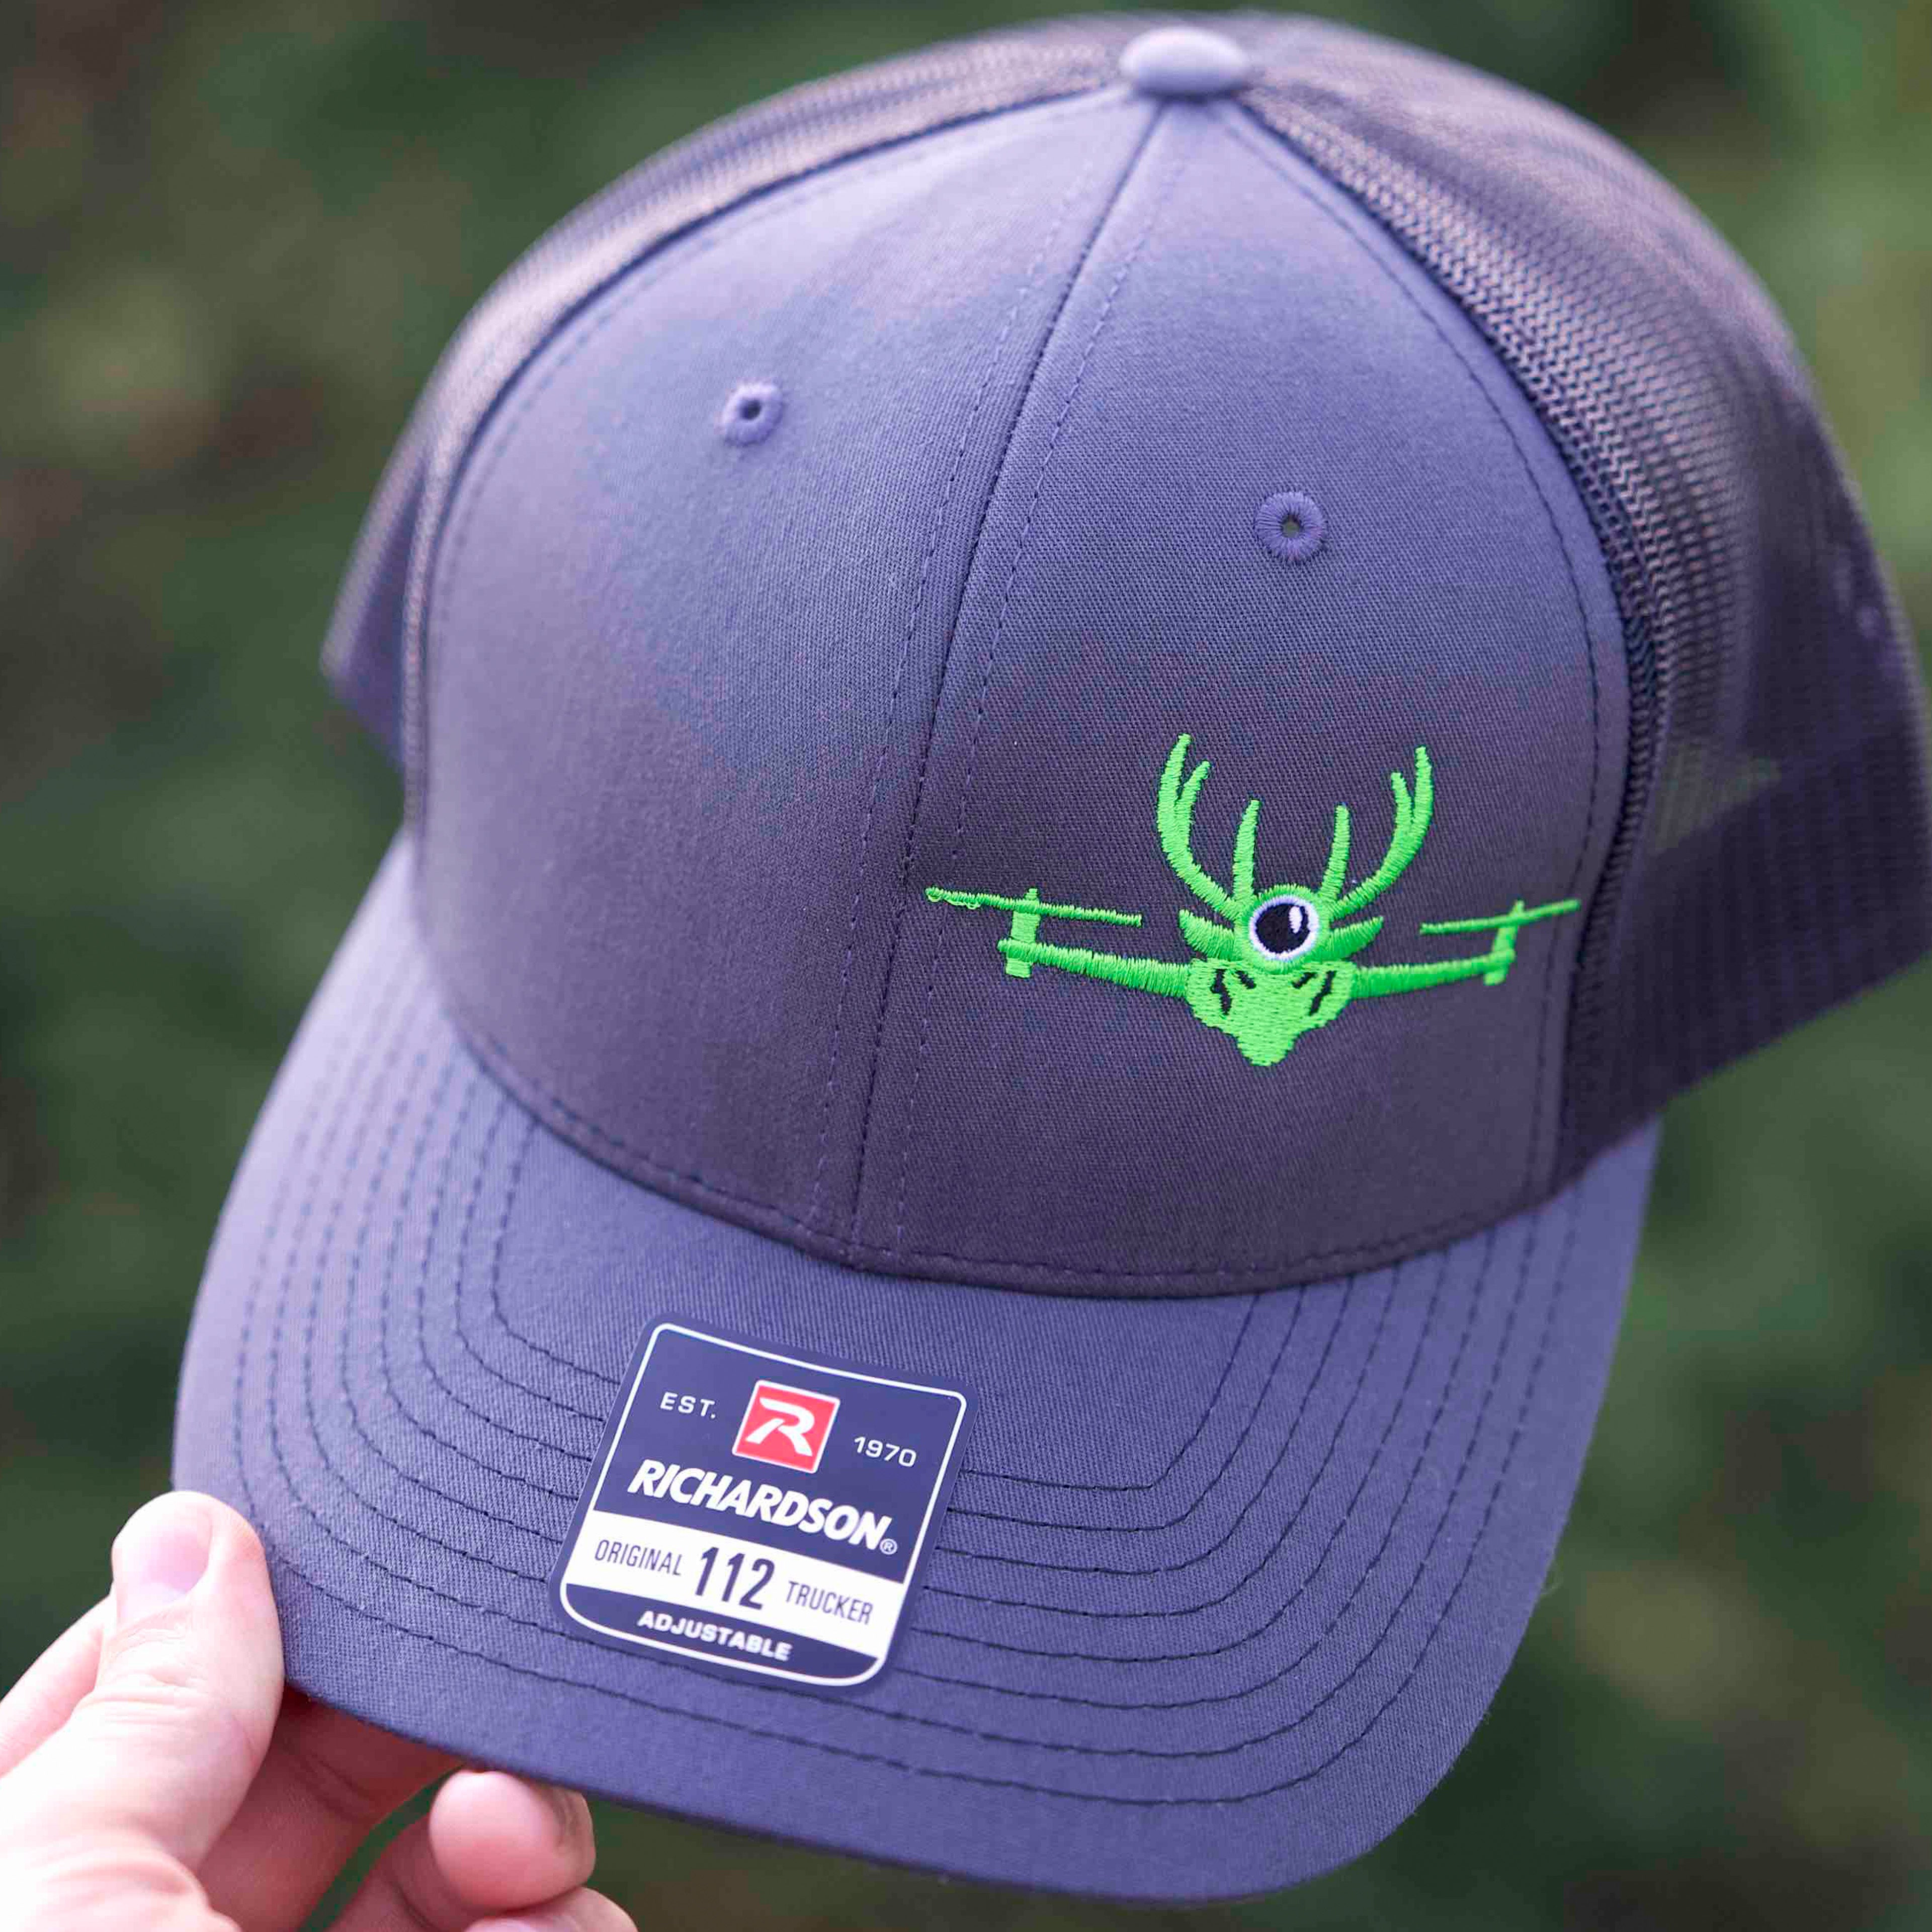 Drone Deer Recovery Ball Cap Hat